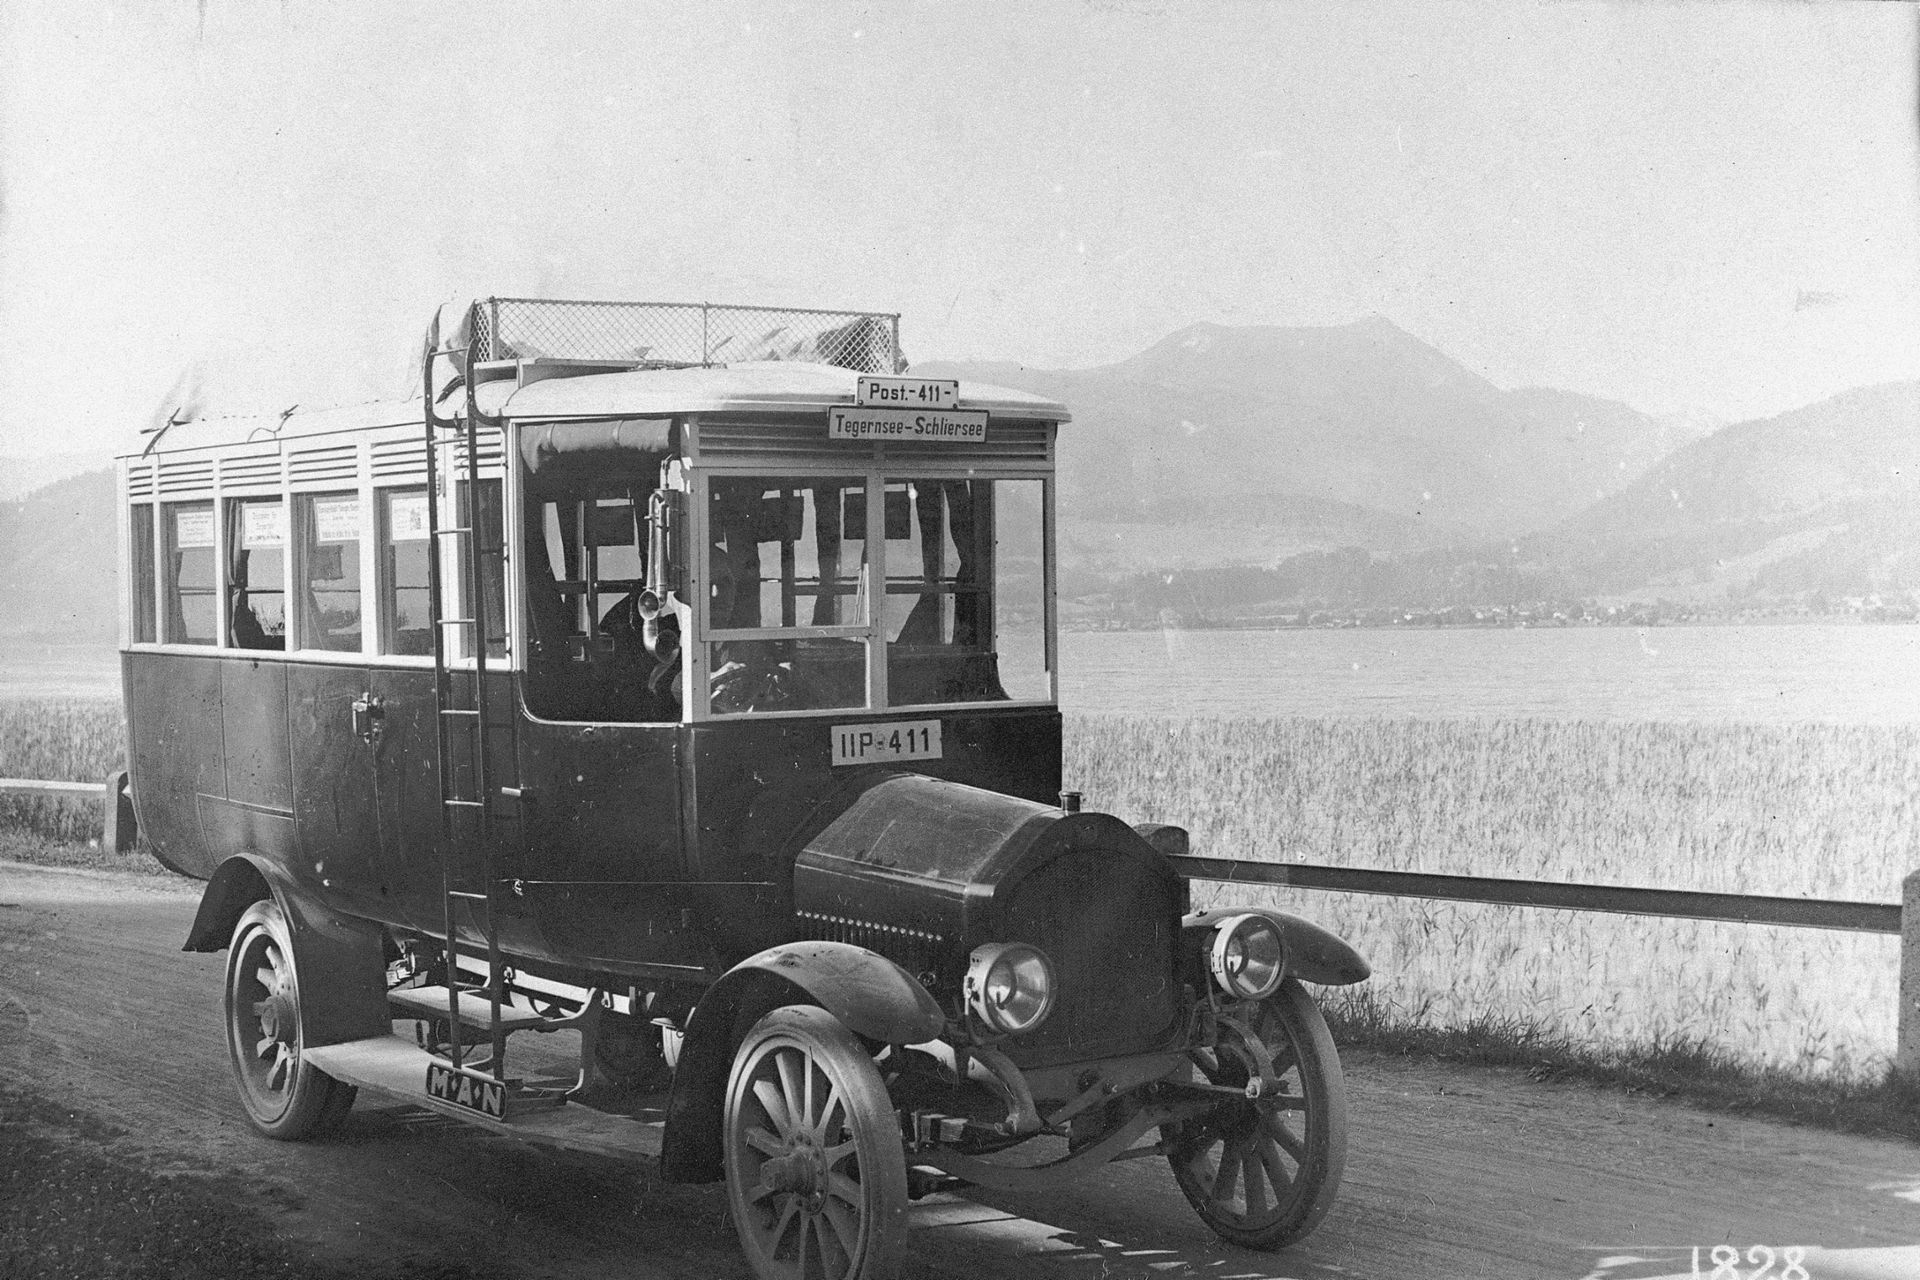 Old black and white image of the MAN 3t Cardanwagen Postbus between Tegernsee and Schliersee 